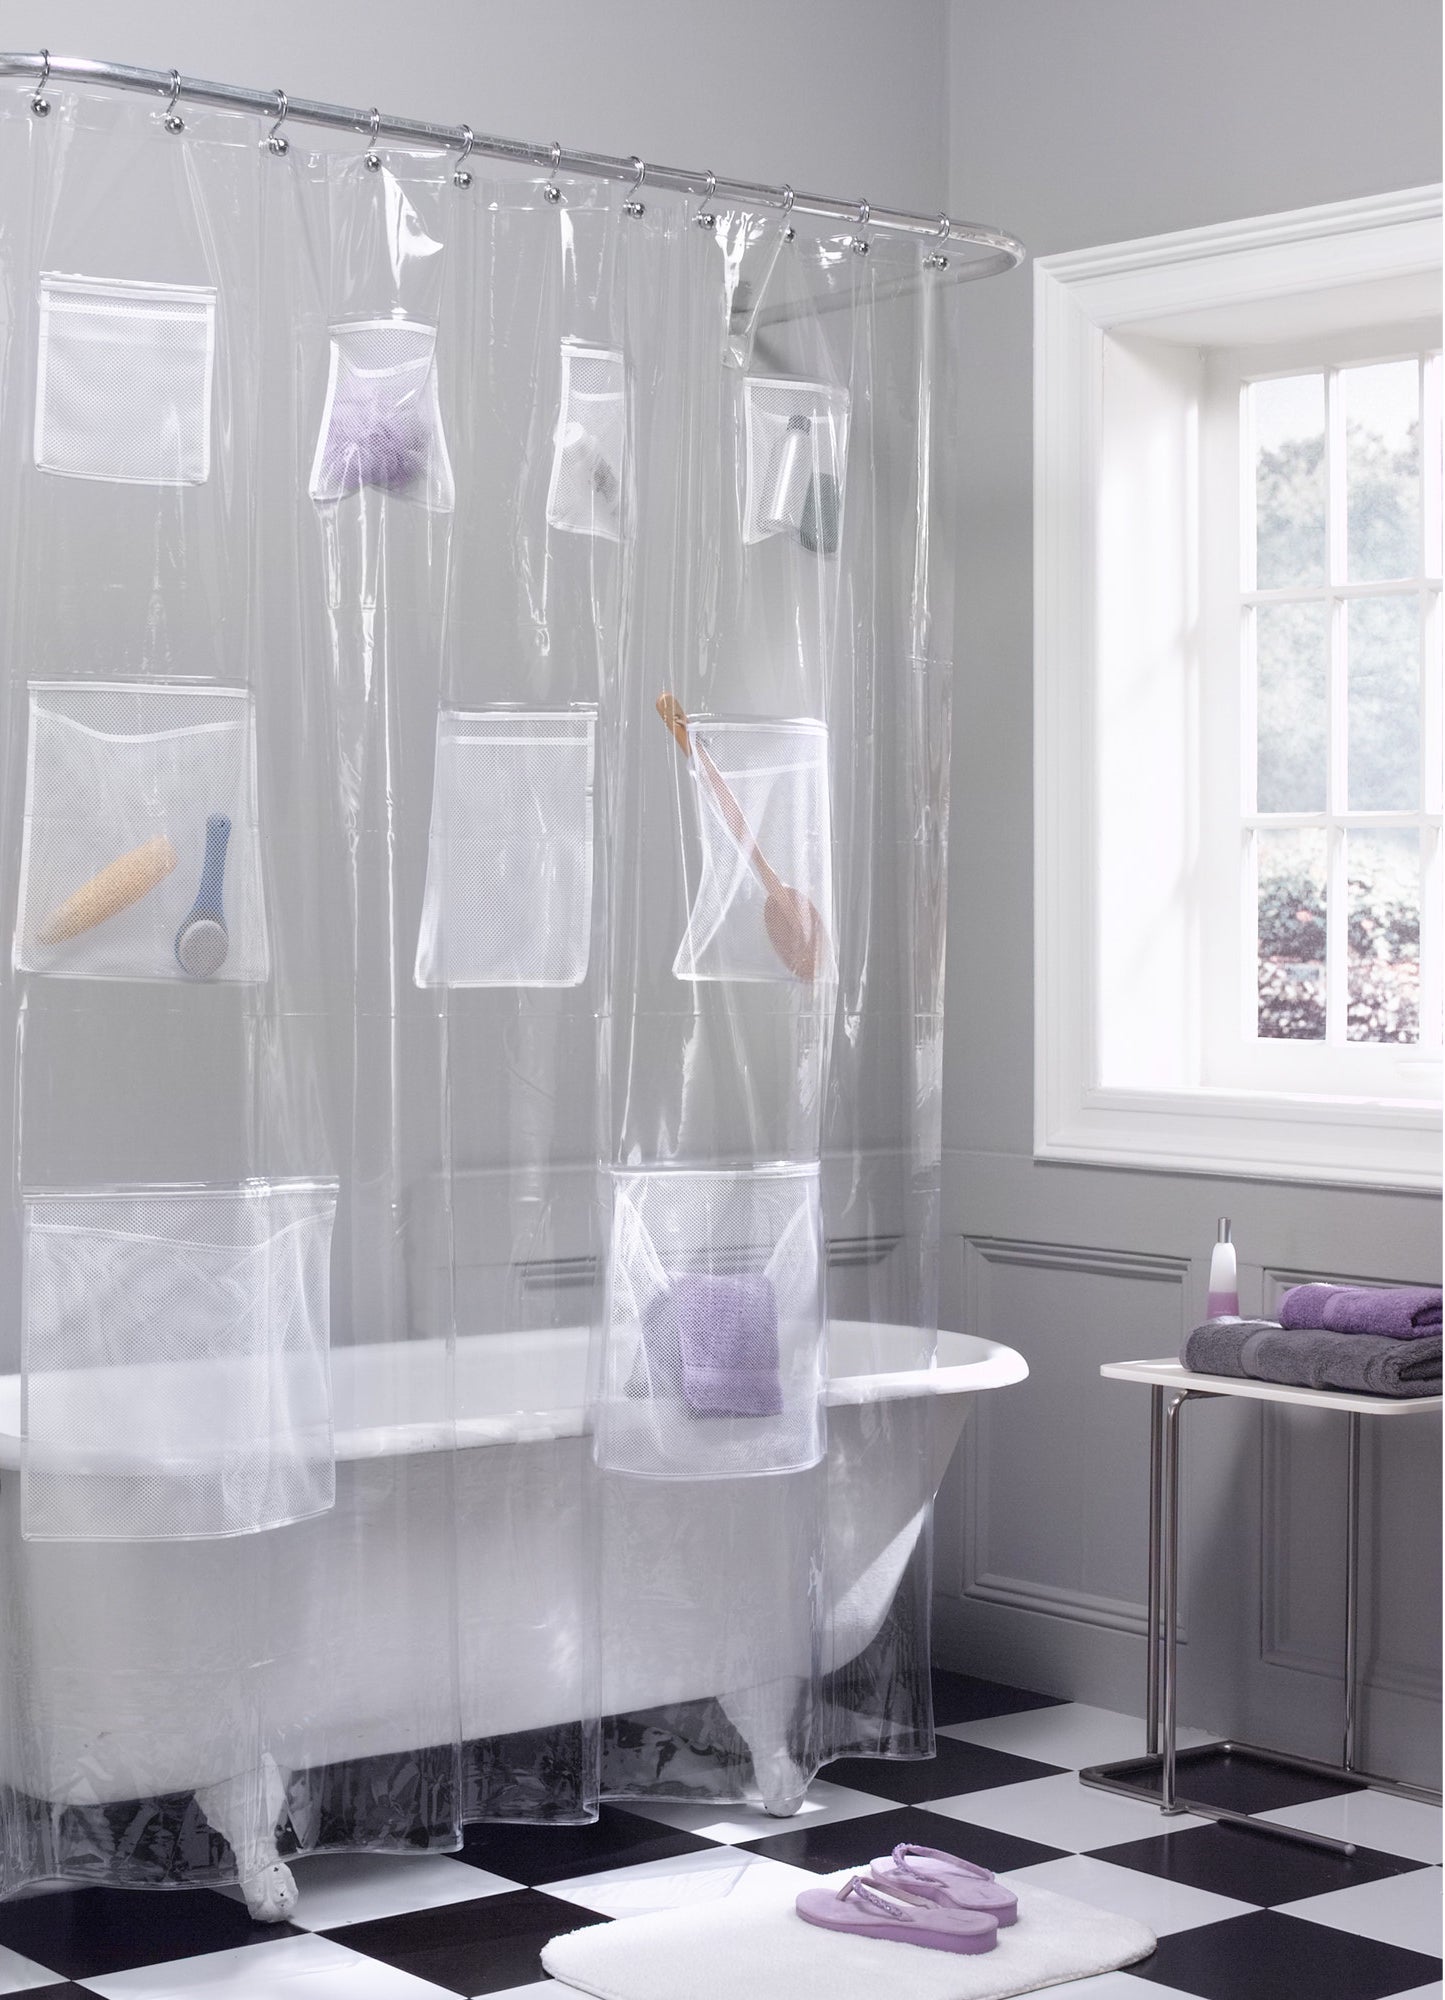 clear shower curtain with mesh pockets in a bathroom